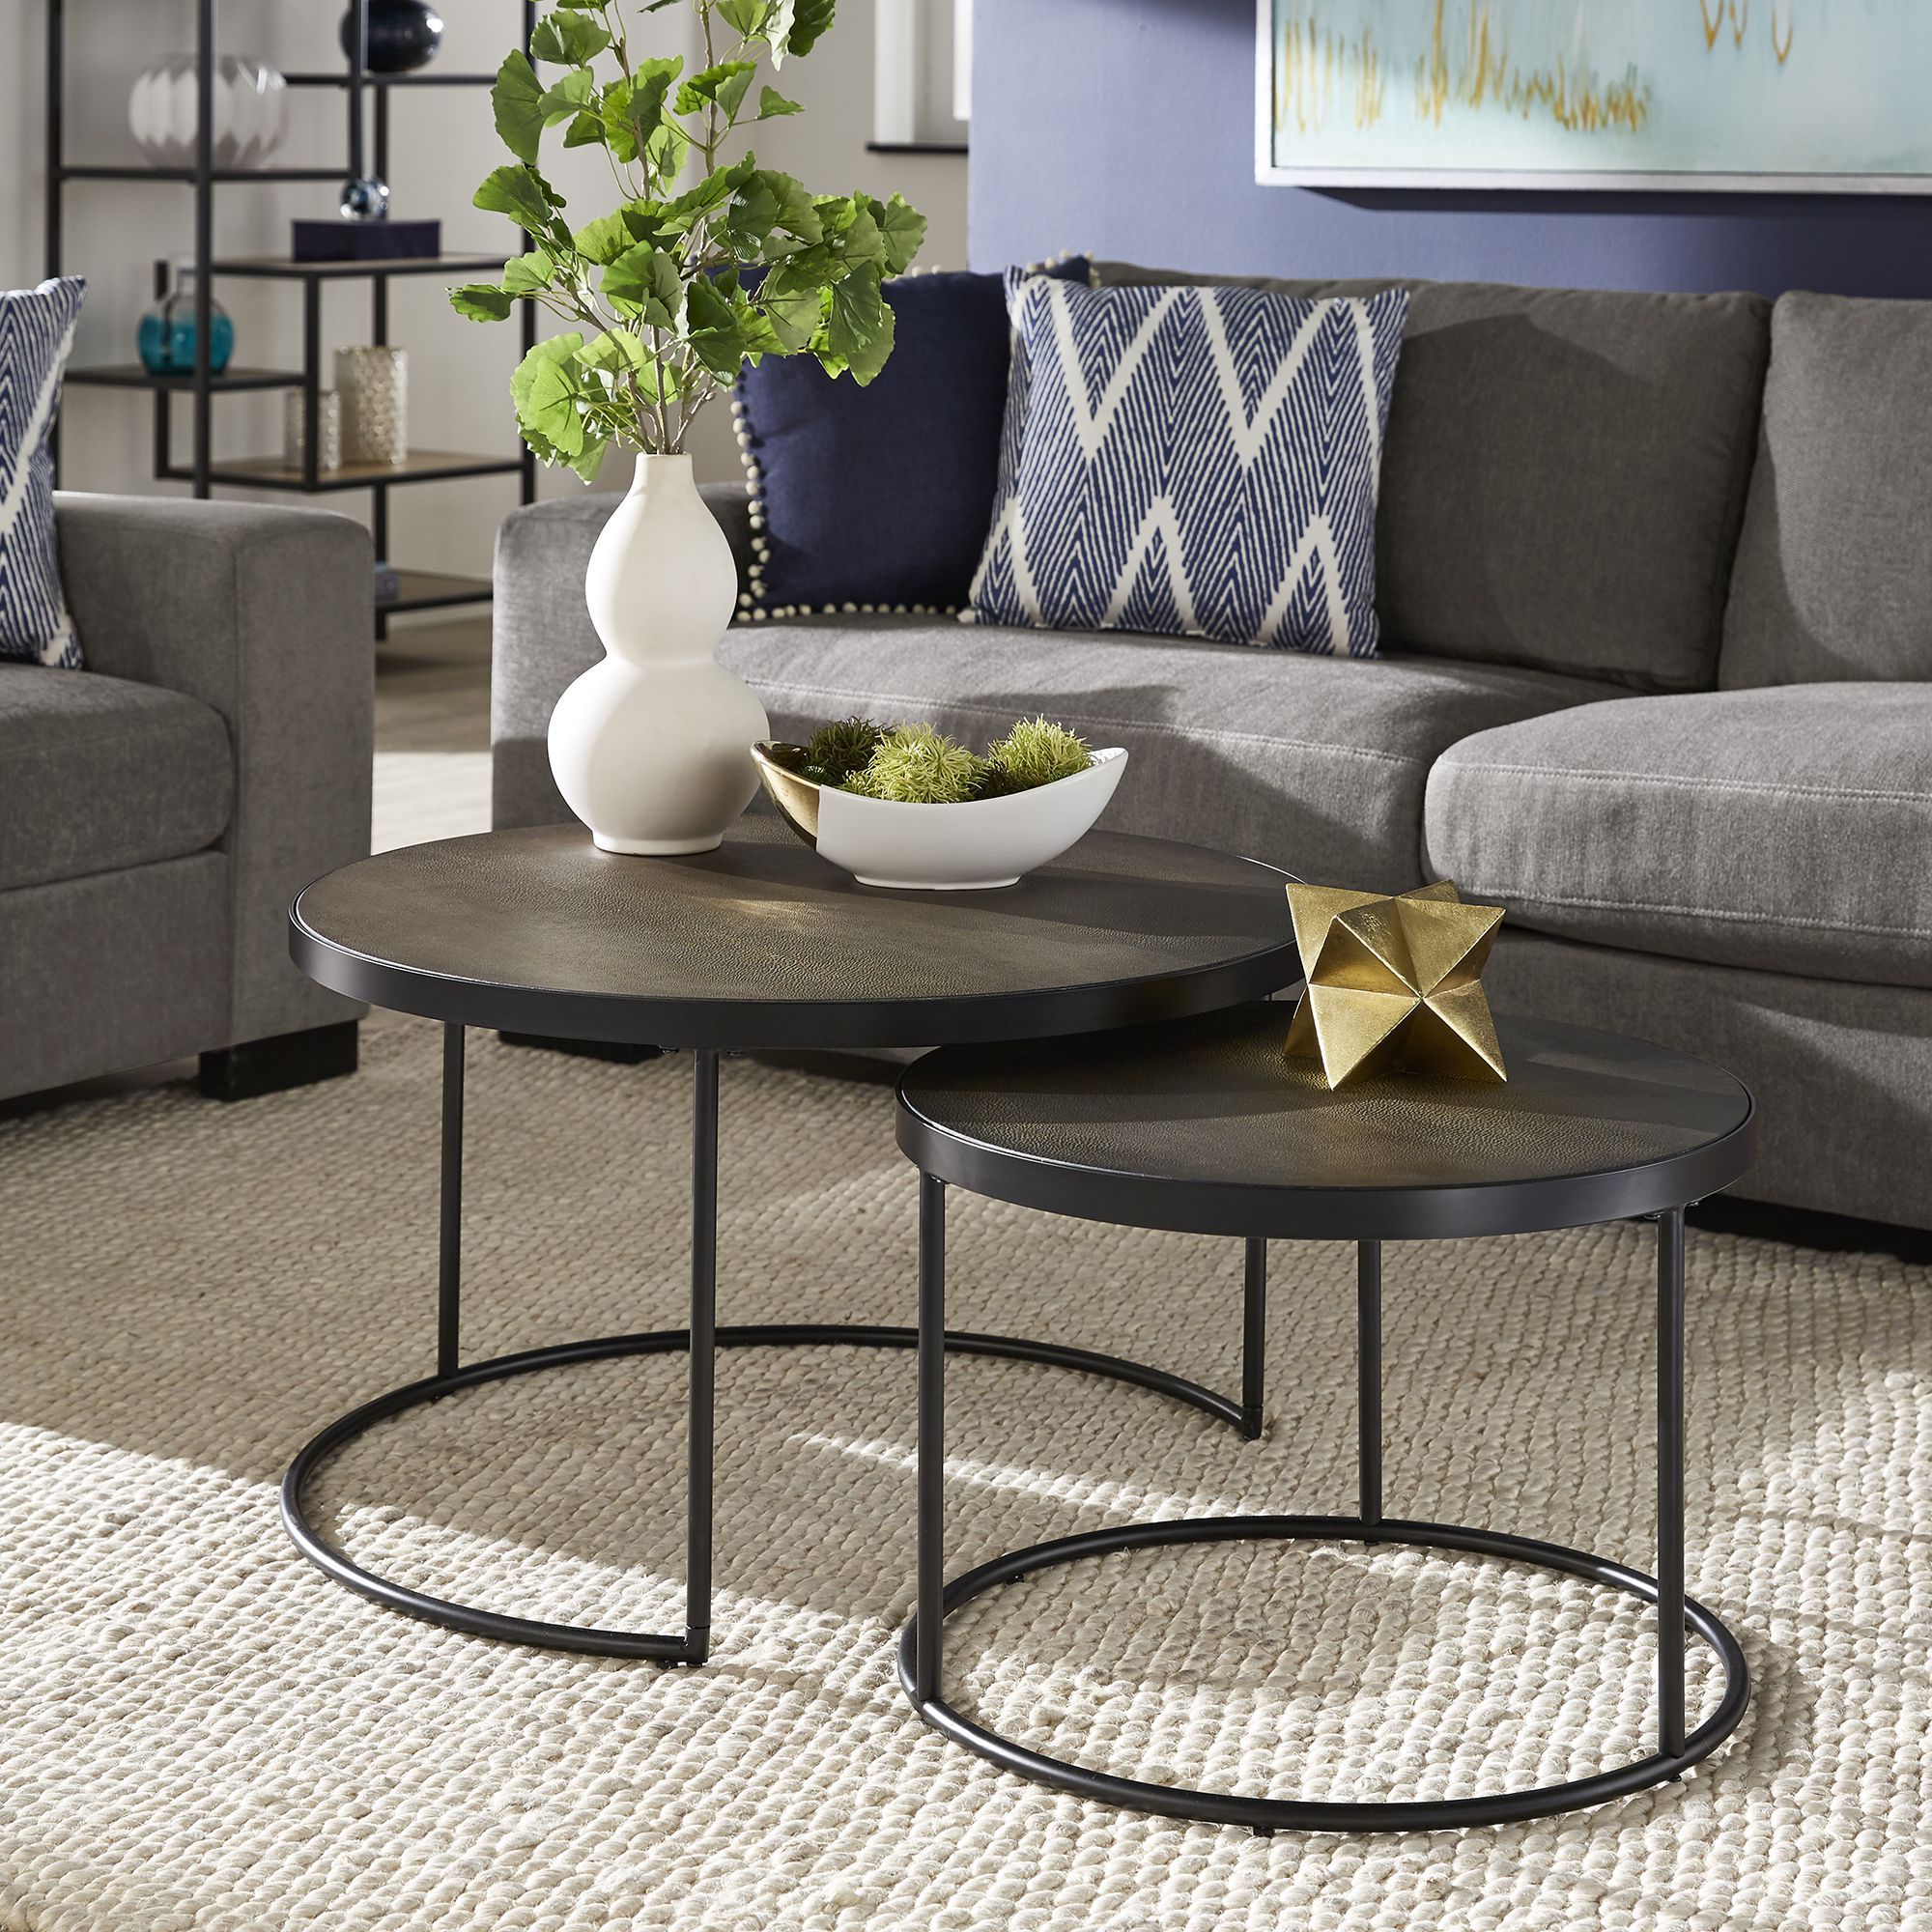 Weston Home Cambridge Black Finish Round Nesting Coffee Tables, Set Of Throughout Widely Used 2 Piece Round Coffee Tables Set (View 1 of 10)